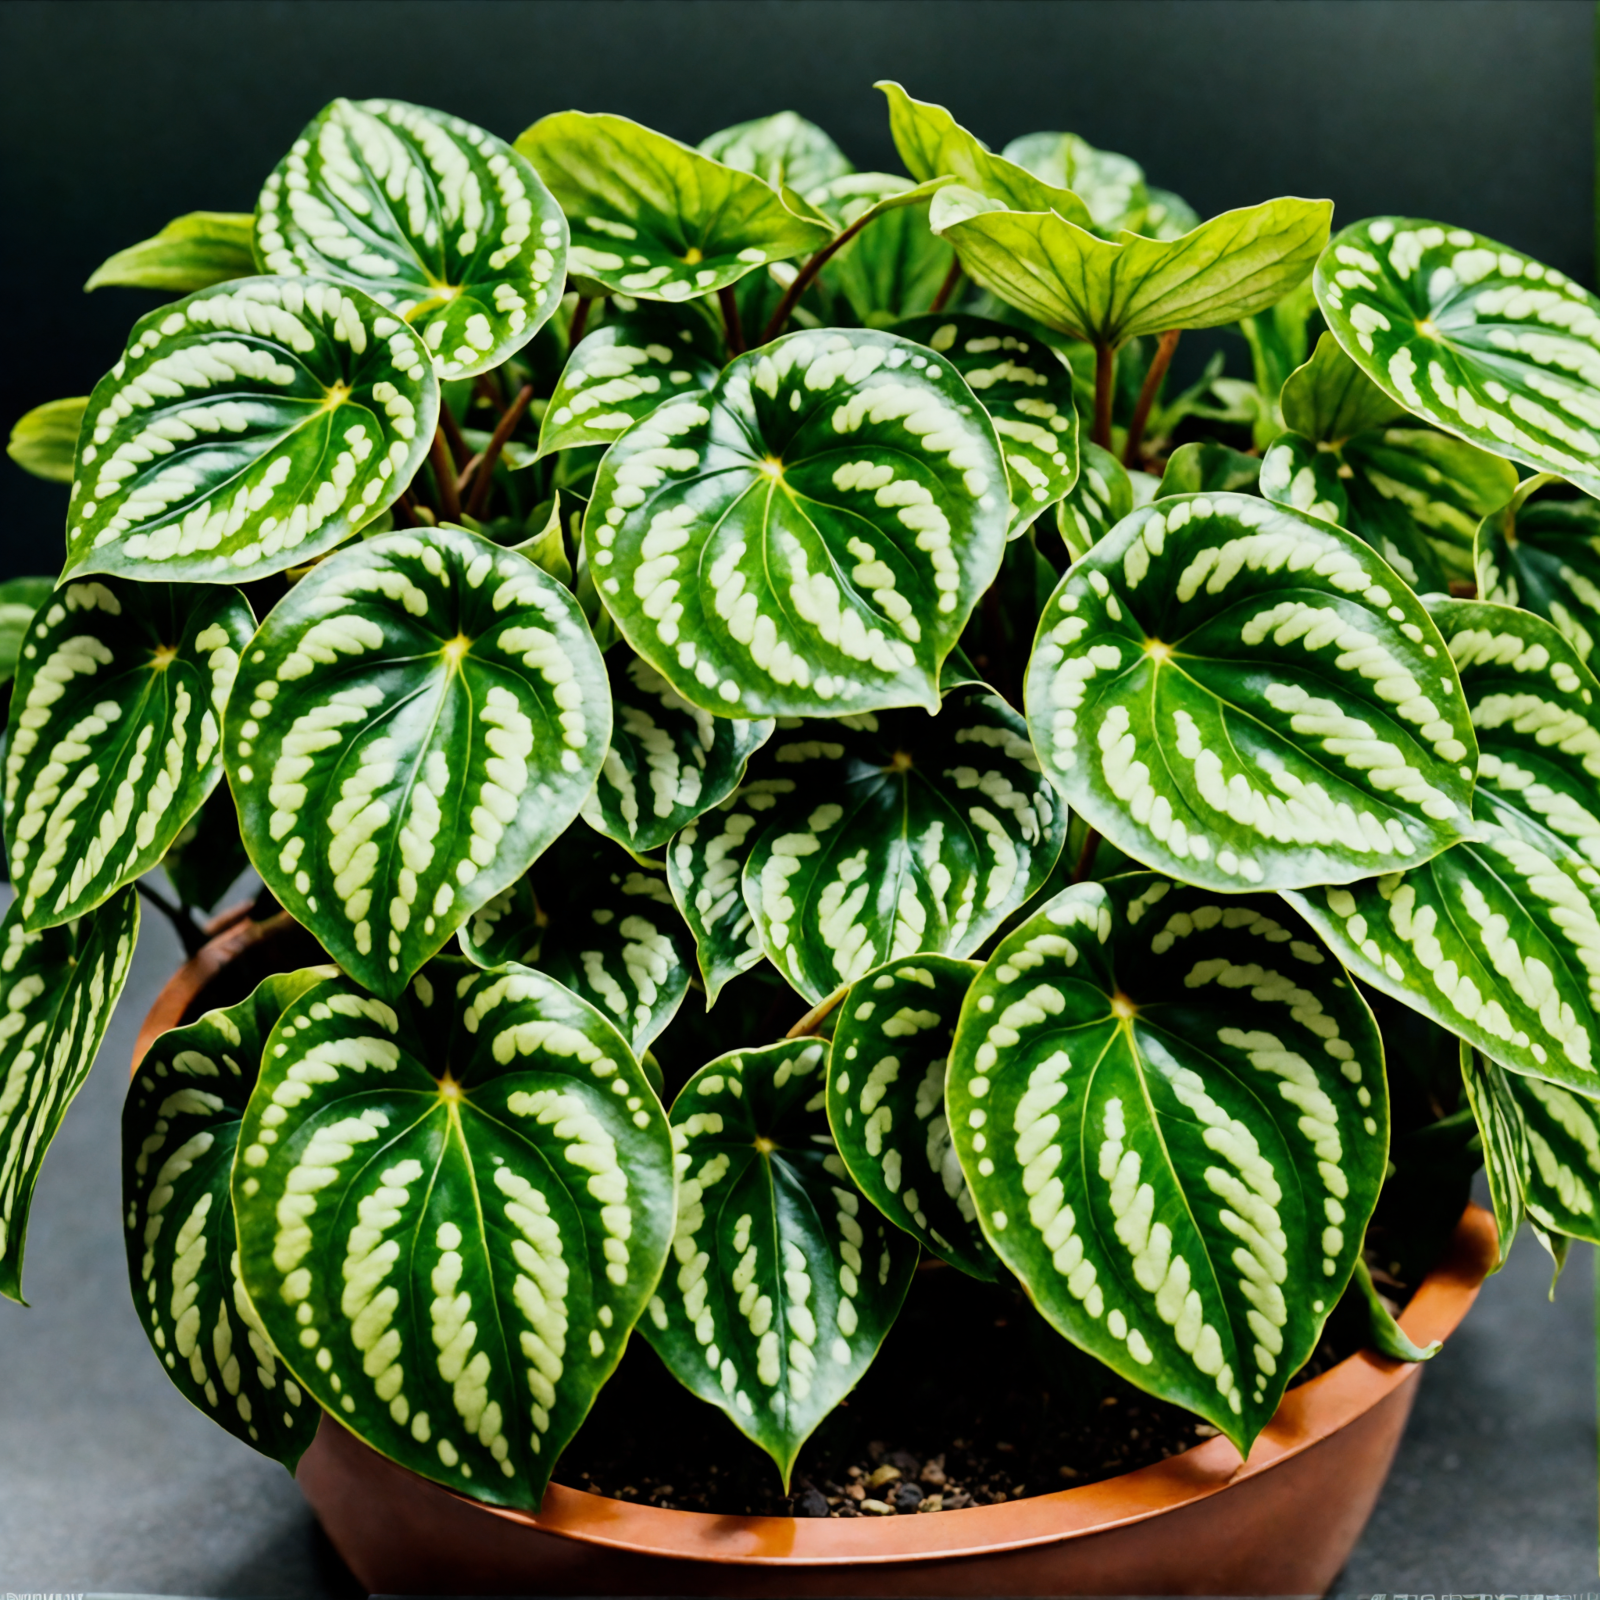 Peperomia argyreia, with its watermelon-patterned leaves, in a bowl planter against a dark backdrop.